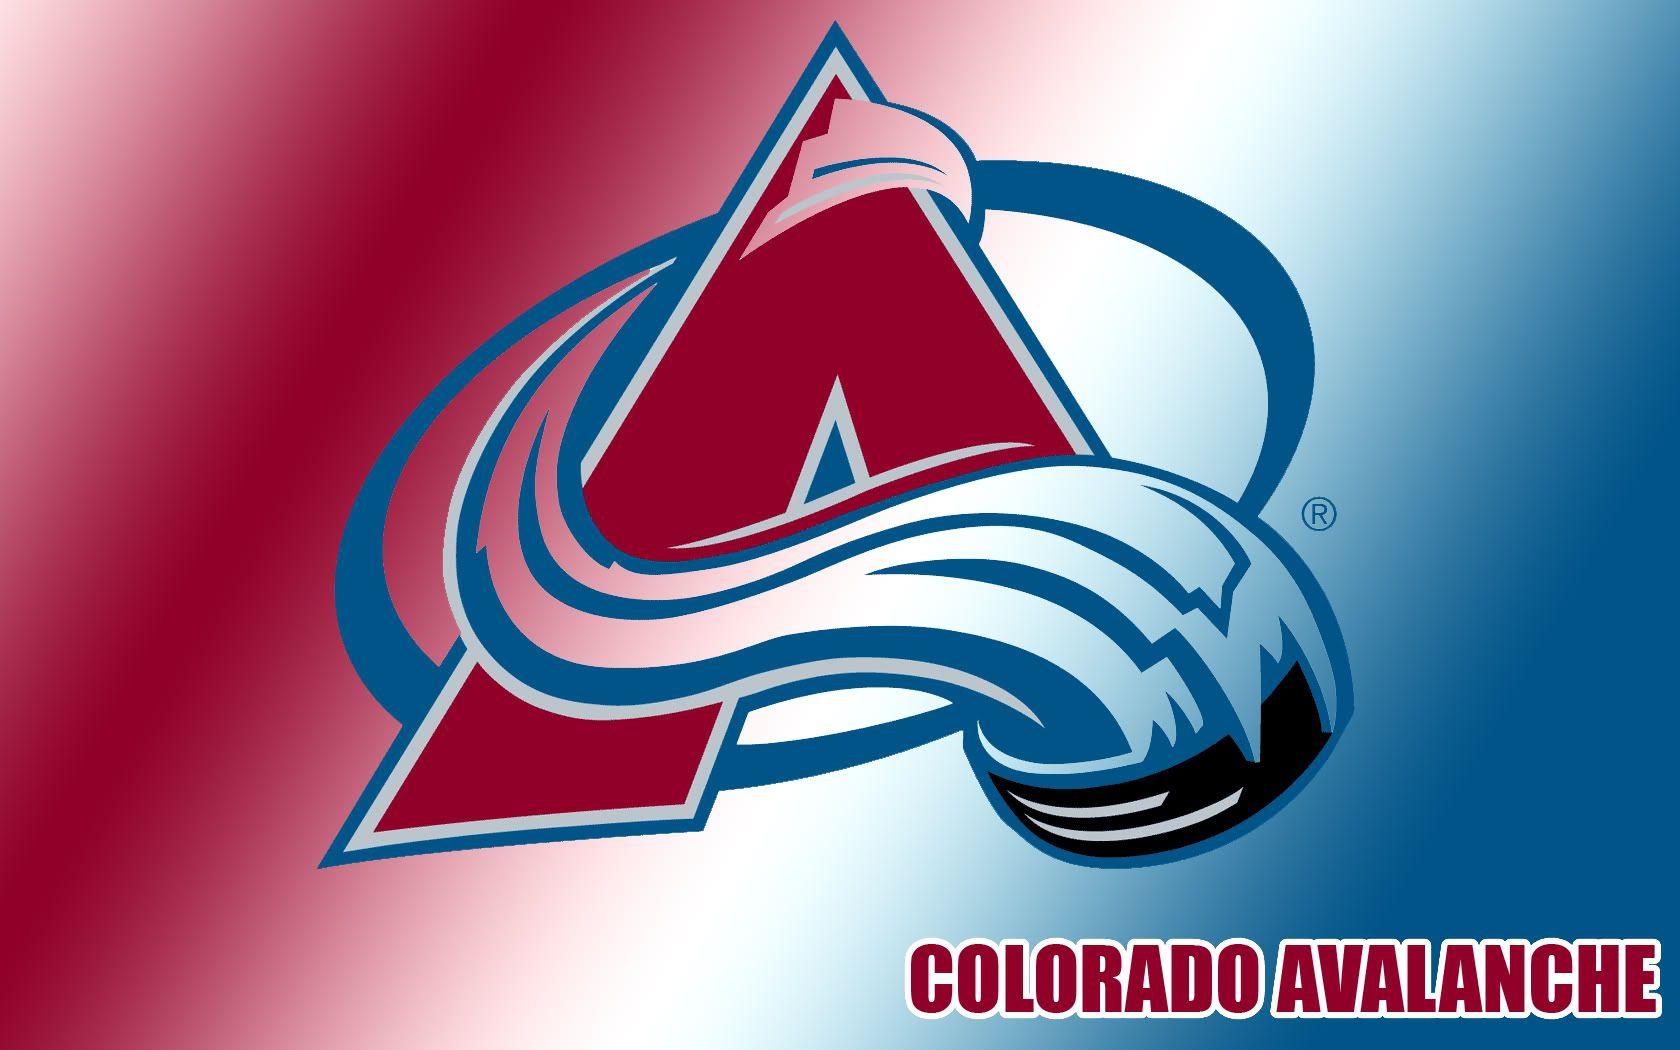 Avalanche wallpaper  Apps on Google Play